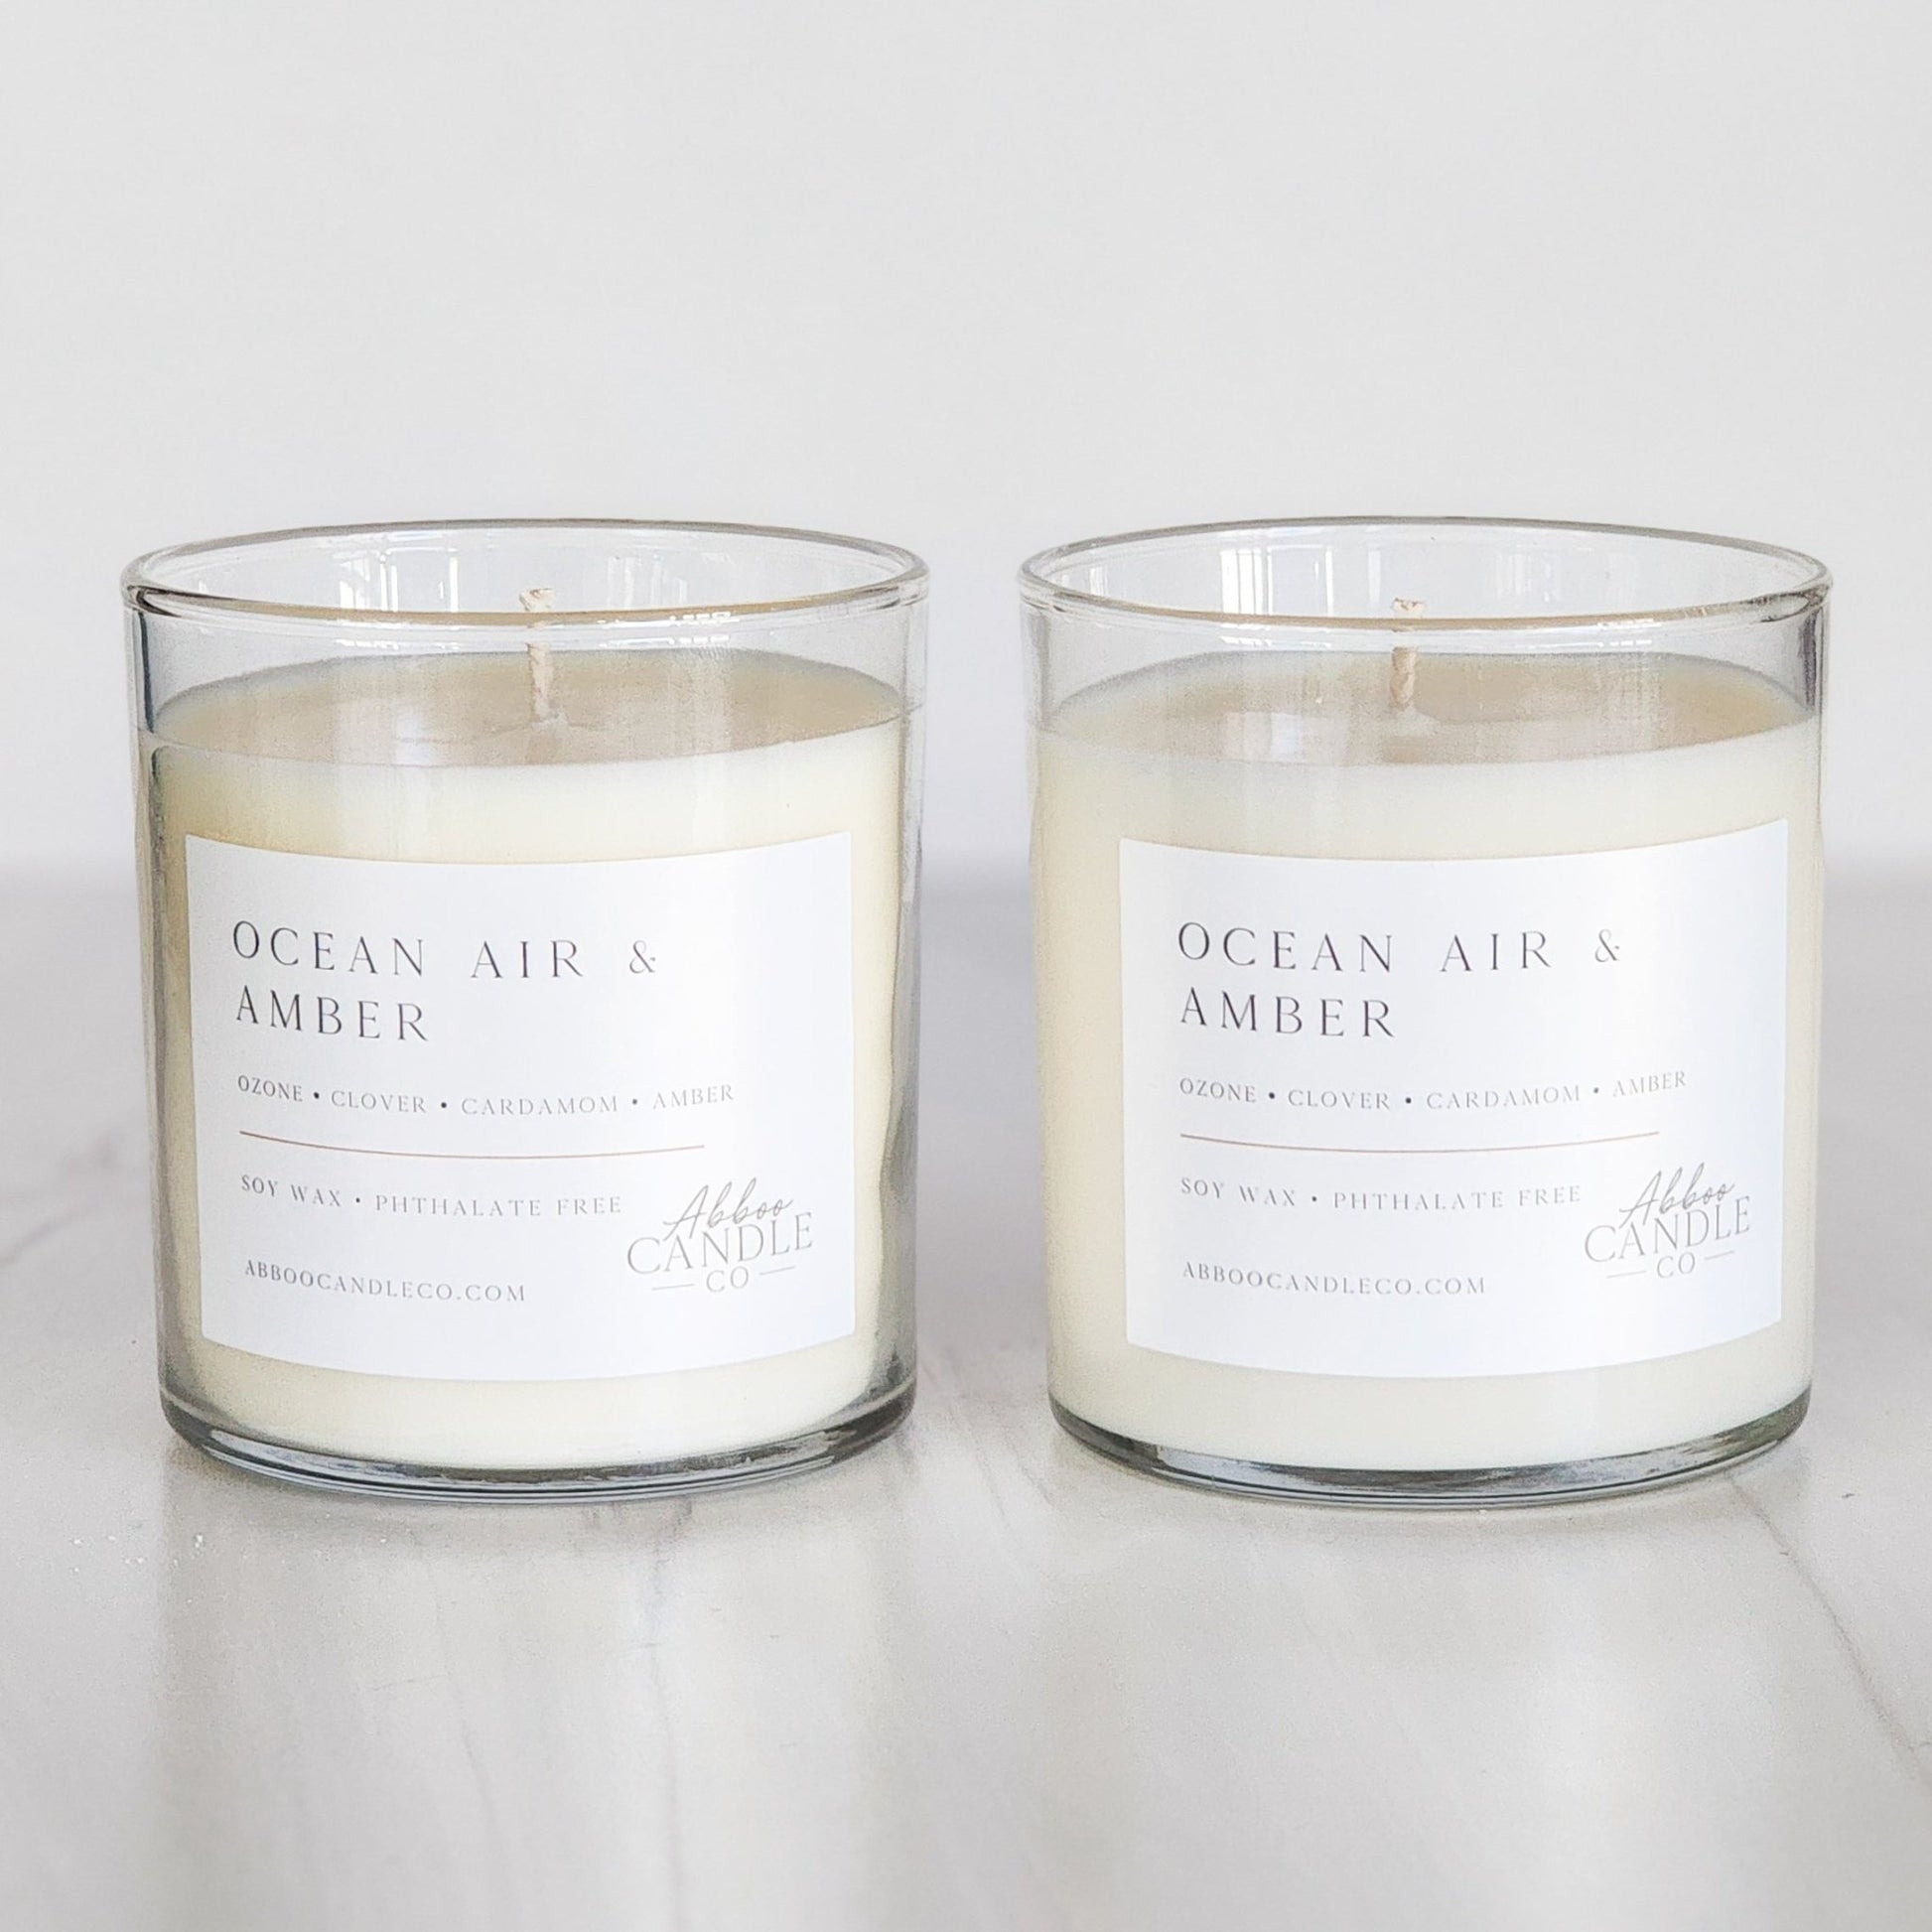 Ocean Air and Amber Soy Candle Bundle - Abboo Candle Co